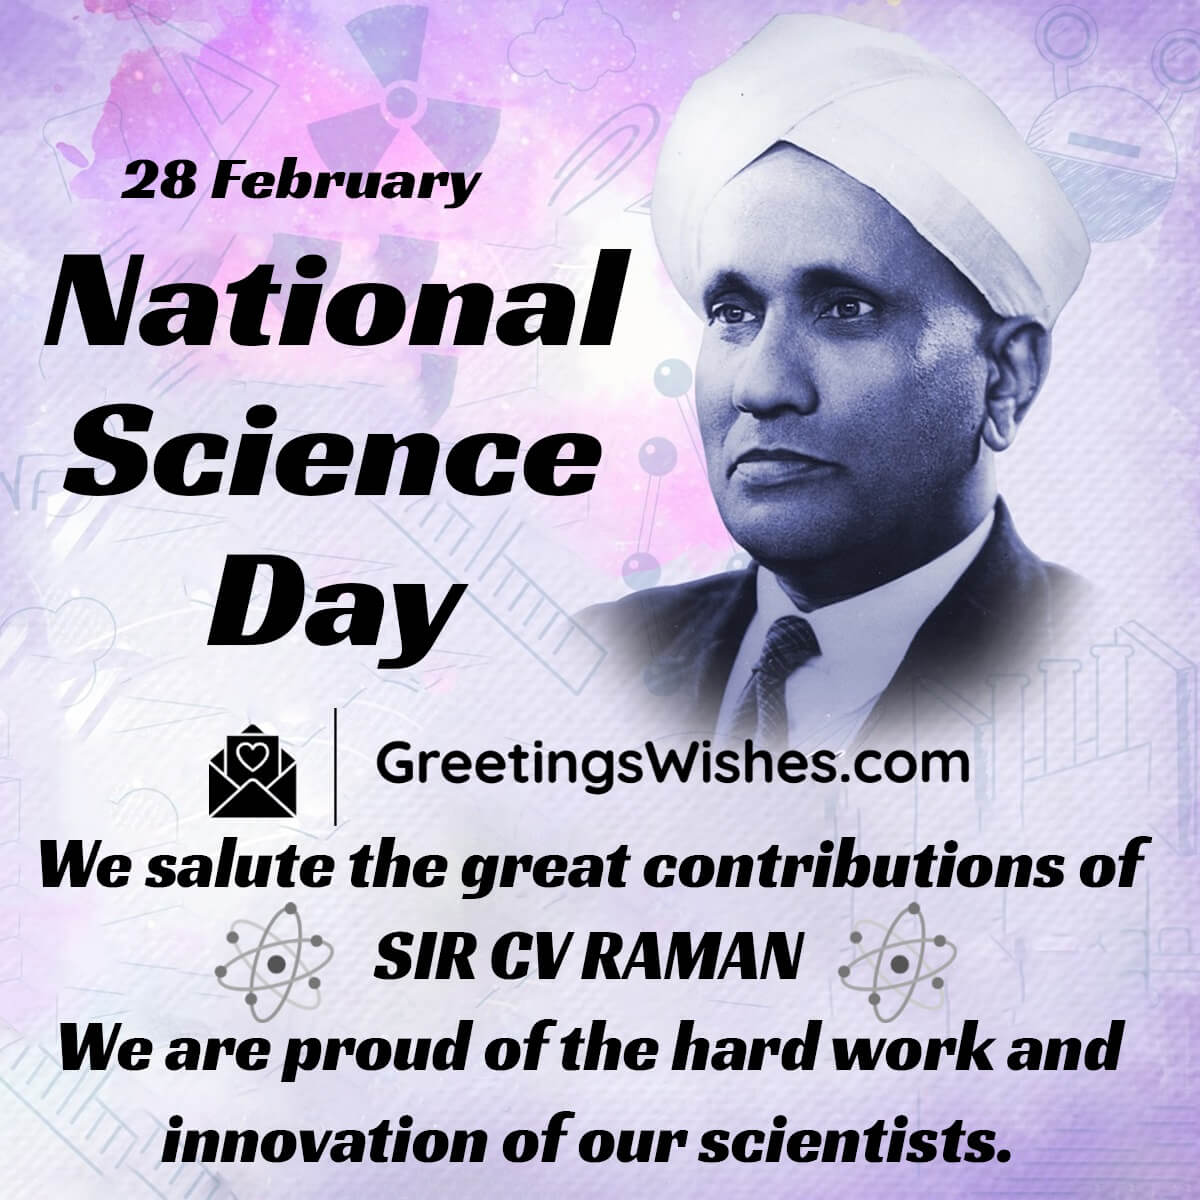 28 February National Science Day Image